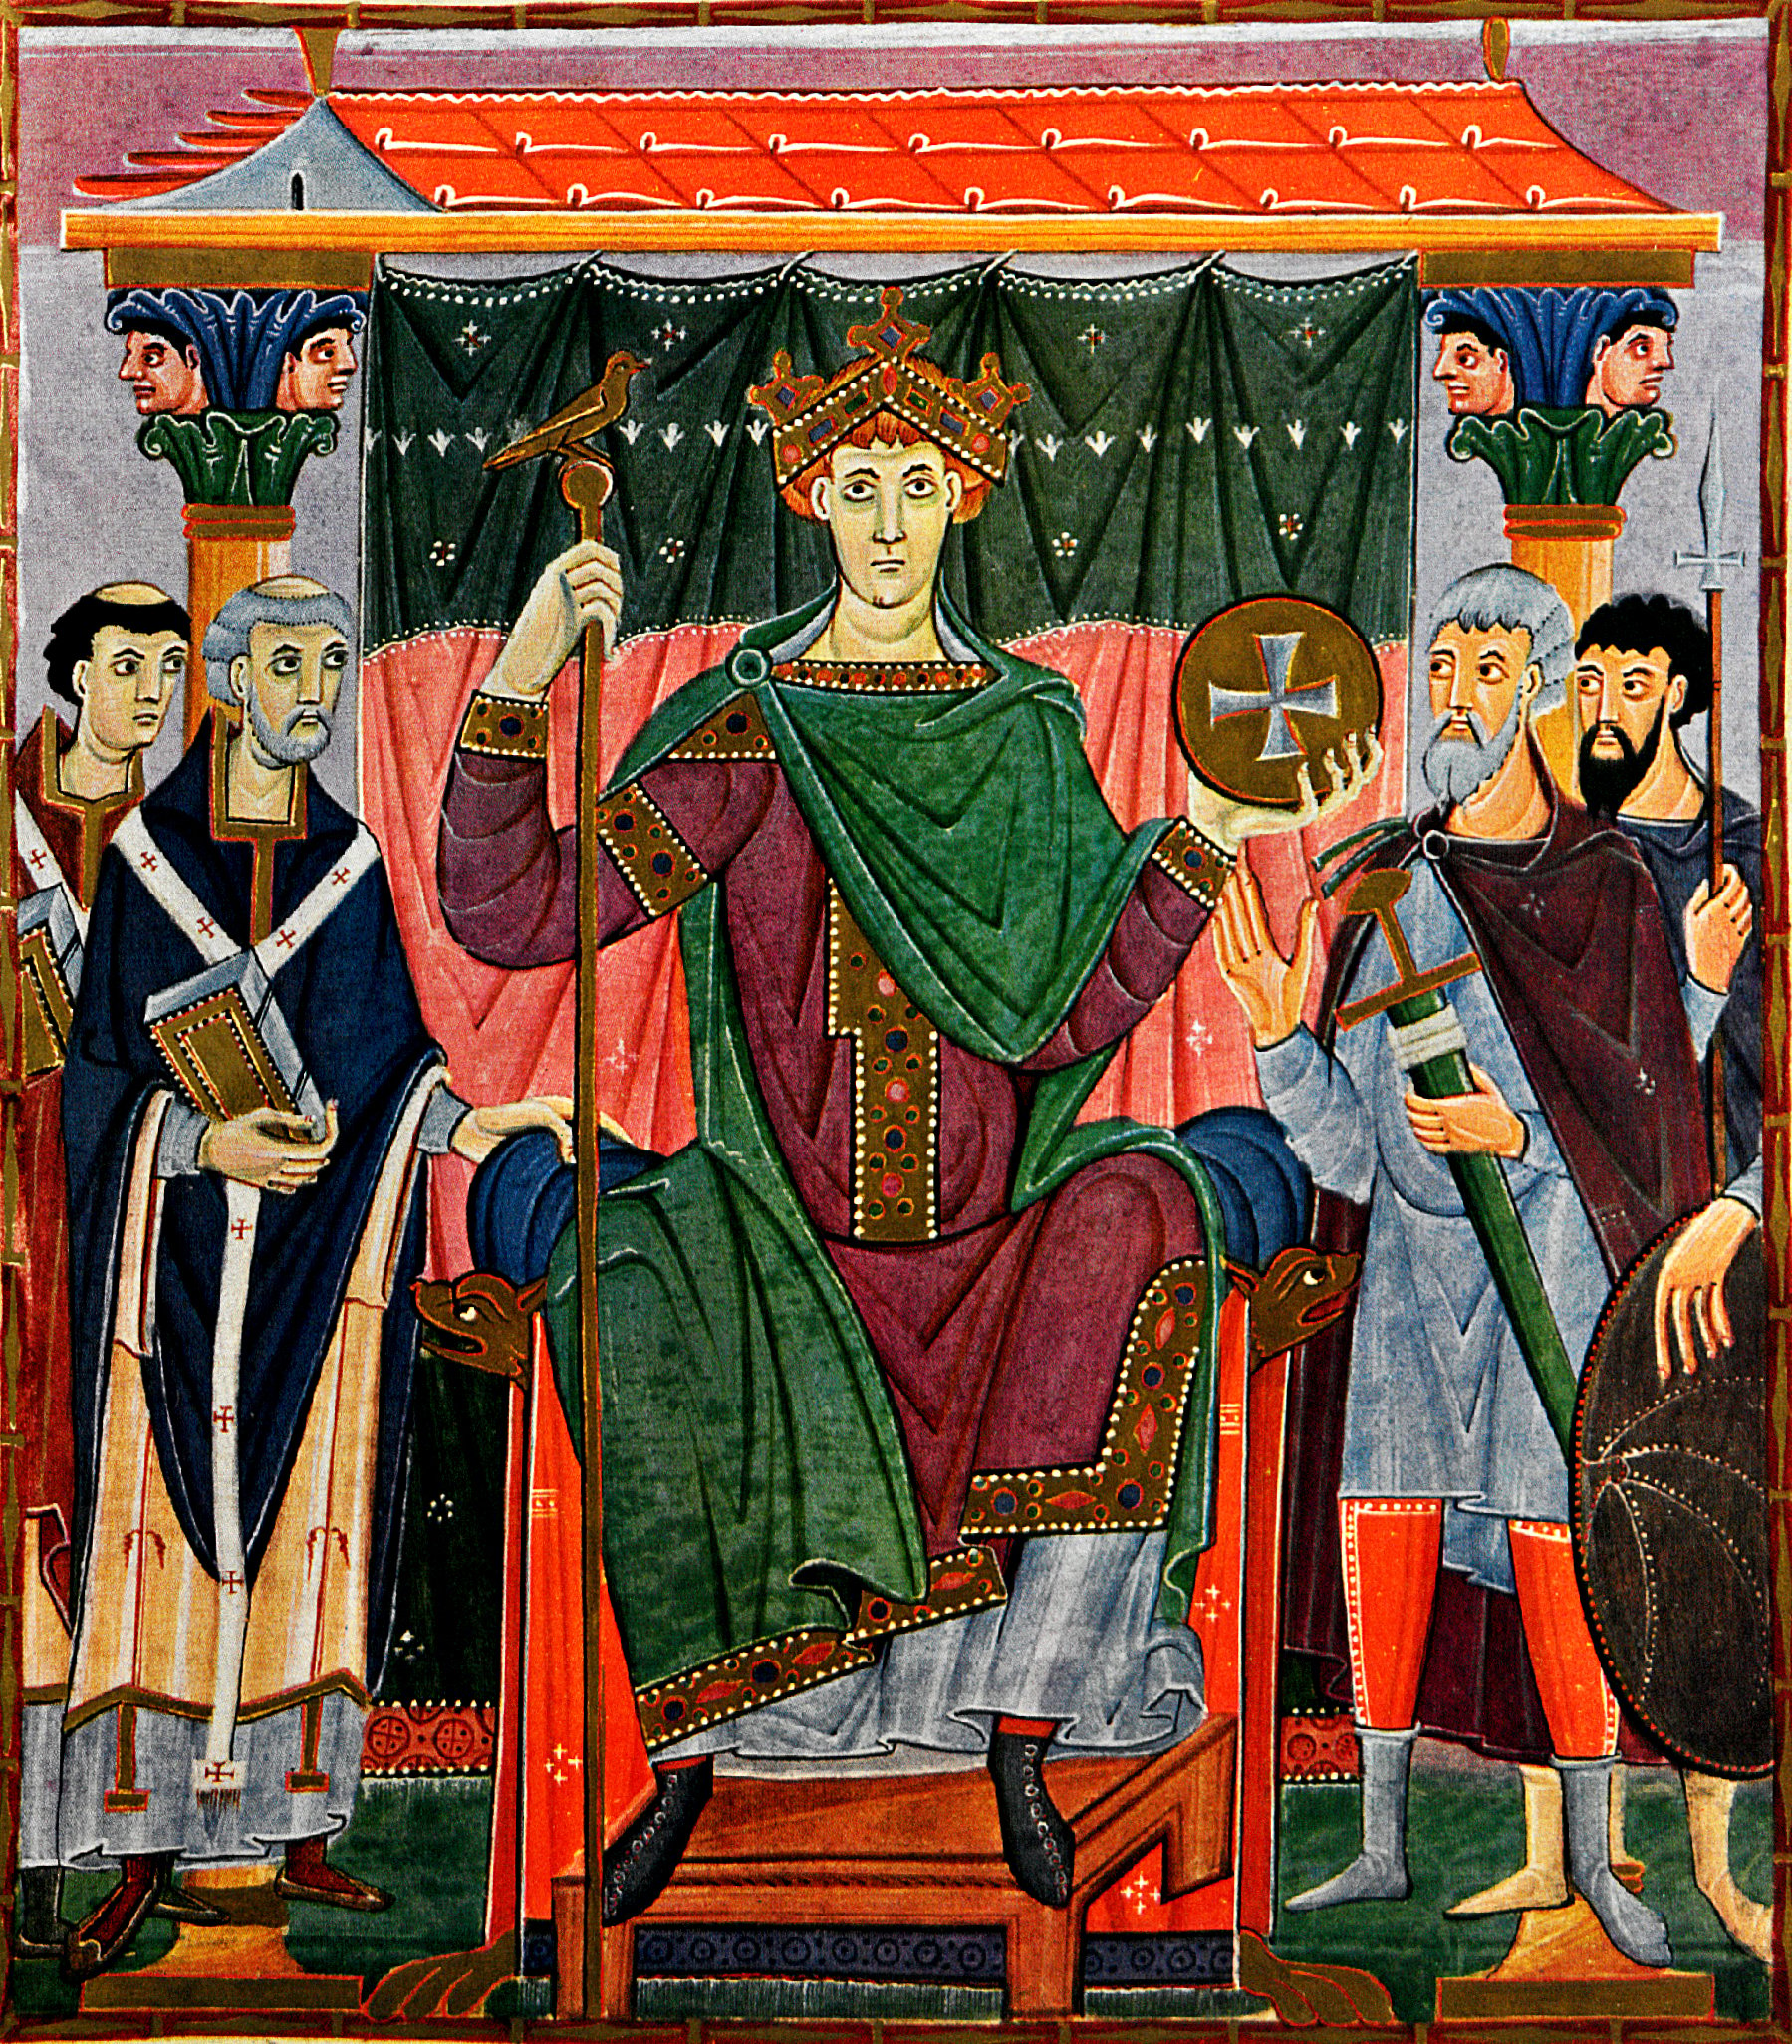 A vividly colored illustration from the Evangeliary of Emperor Otto III. The scene depicts the enthroned ruler, Otto III, wearing a crown and royal robes, holding a staff in one hand and a sphere with a cross in the other. He is surrounded by advisors and clerics, one of whom holds an open book. The backdrop is a decorated canopy with intricate patterns.